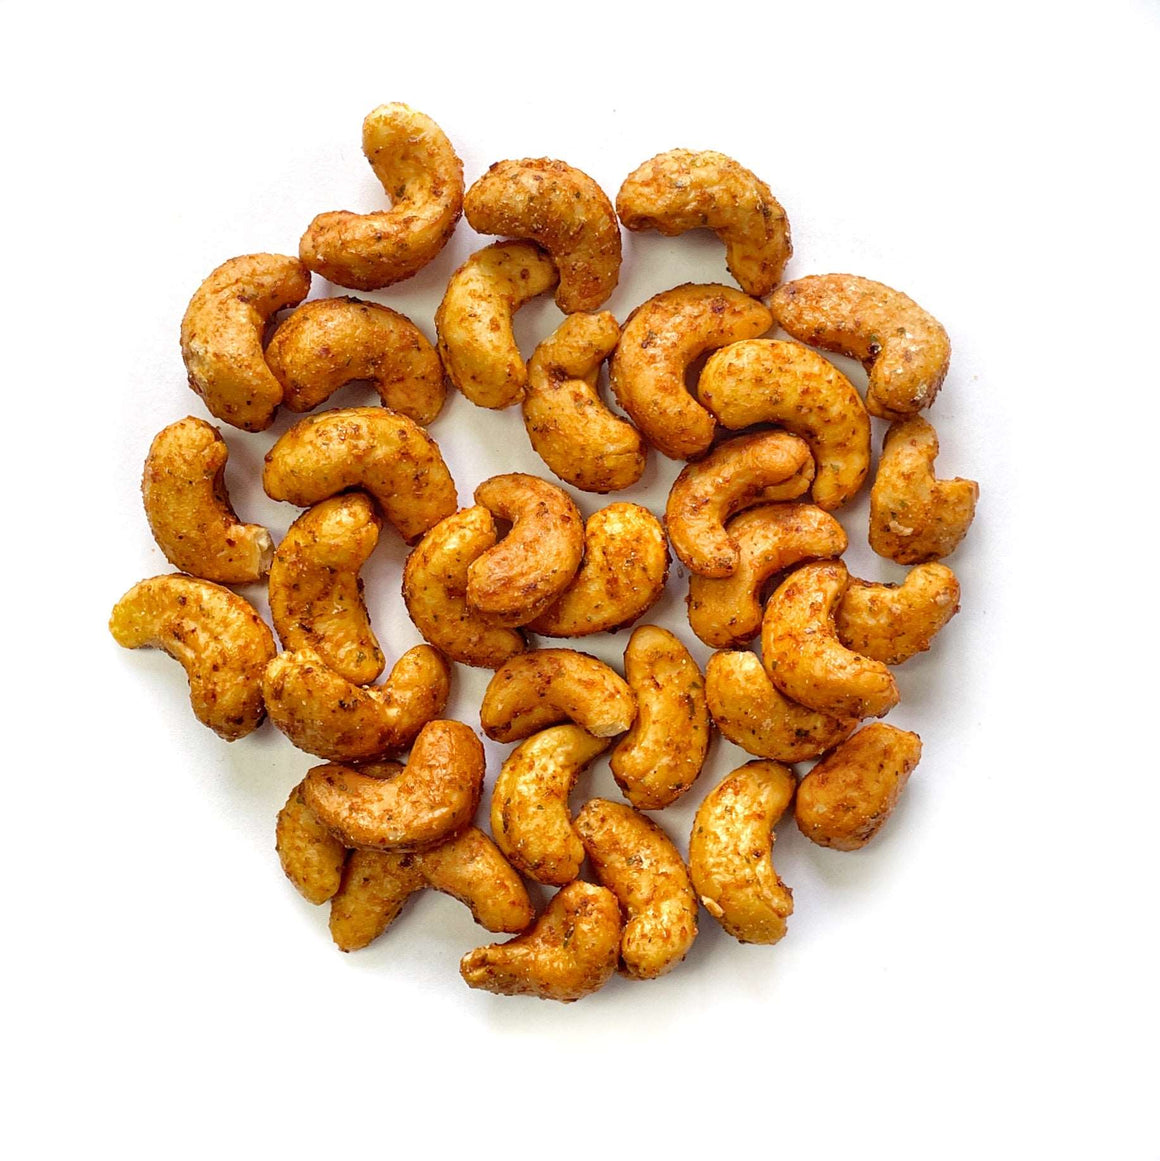 Sweet Chilli Cashews are arranged in a circle on a white background.